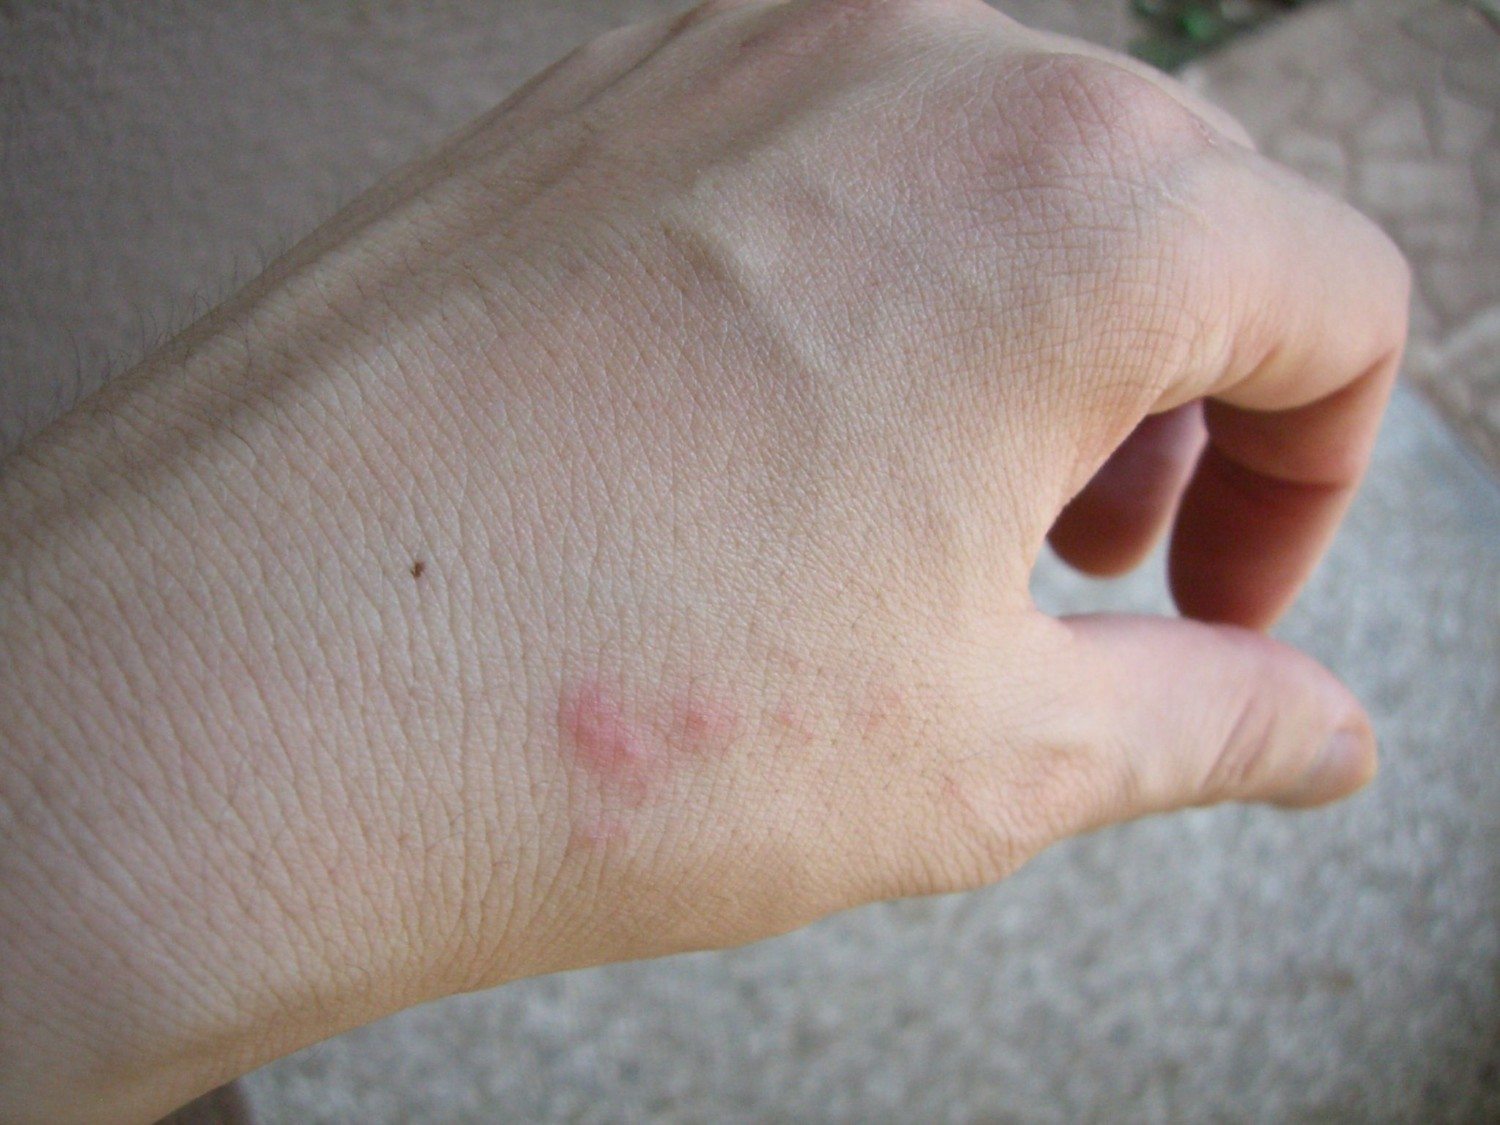 photos of bug bites that itch